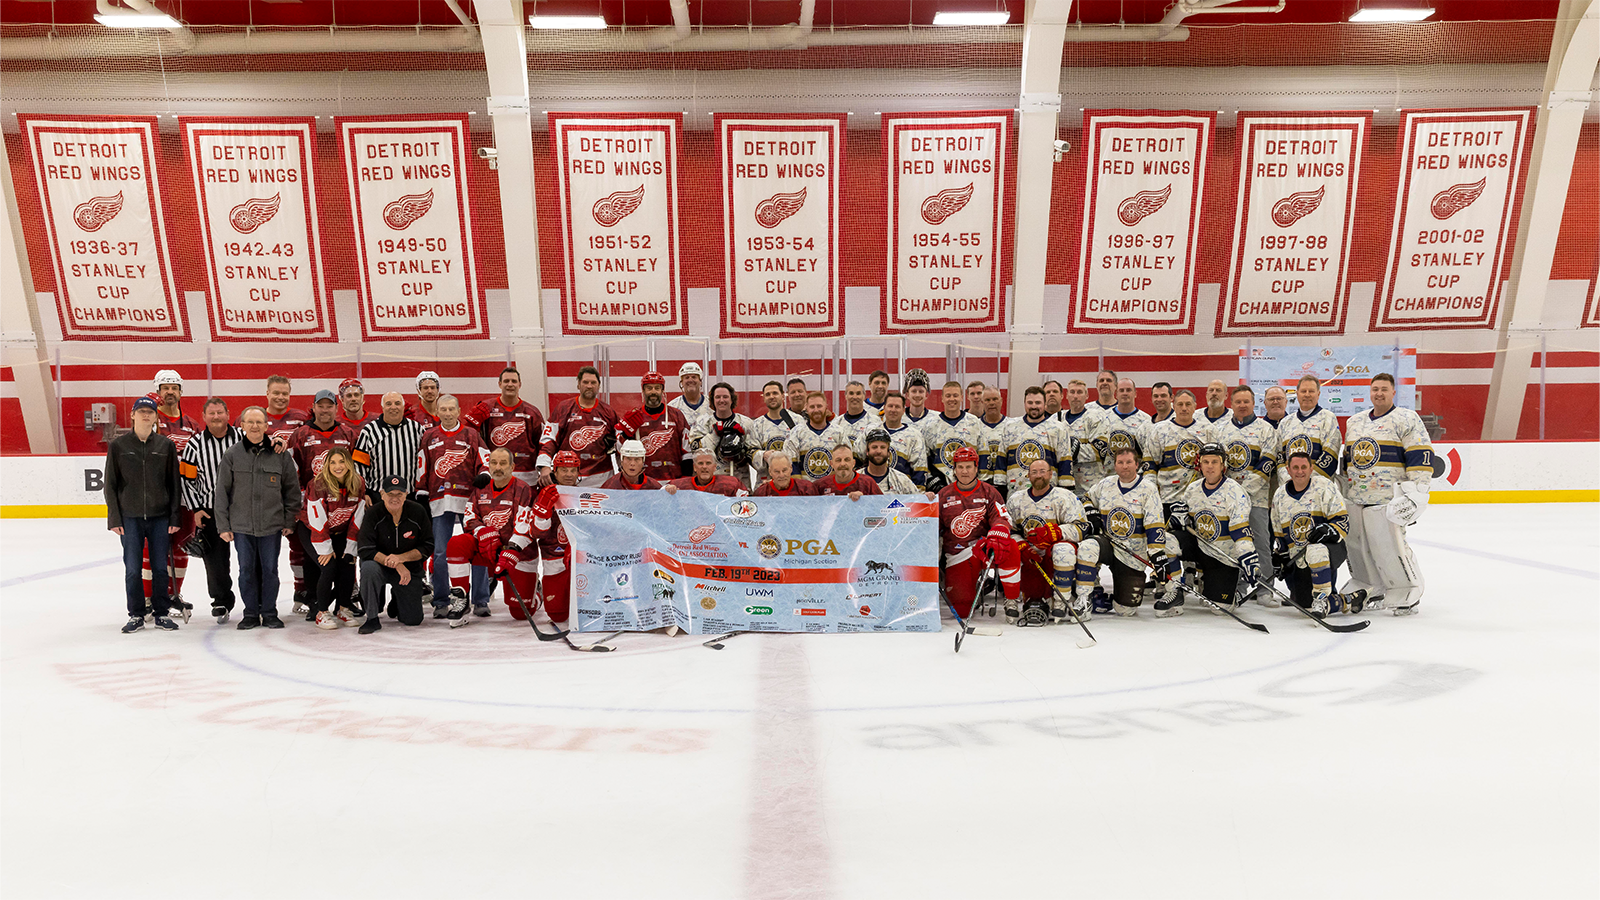 Players, coaches and representatives from the Michigan PGA and Detroit Red Wings Alumni Association pose for a post-game photo at BELFOR Training Center in Detroit.